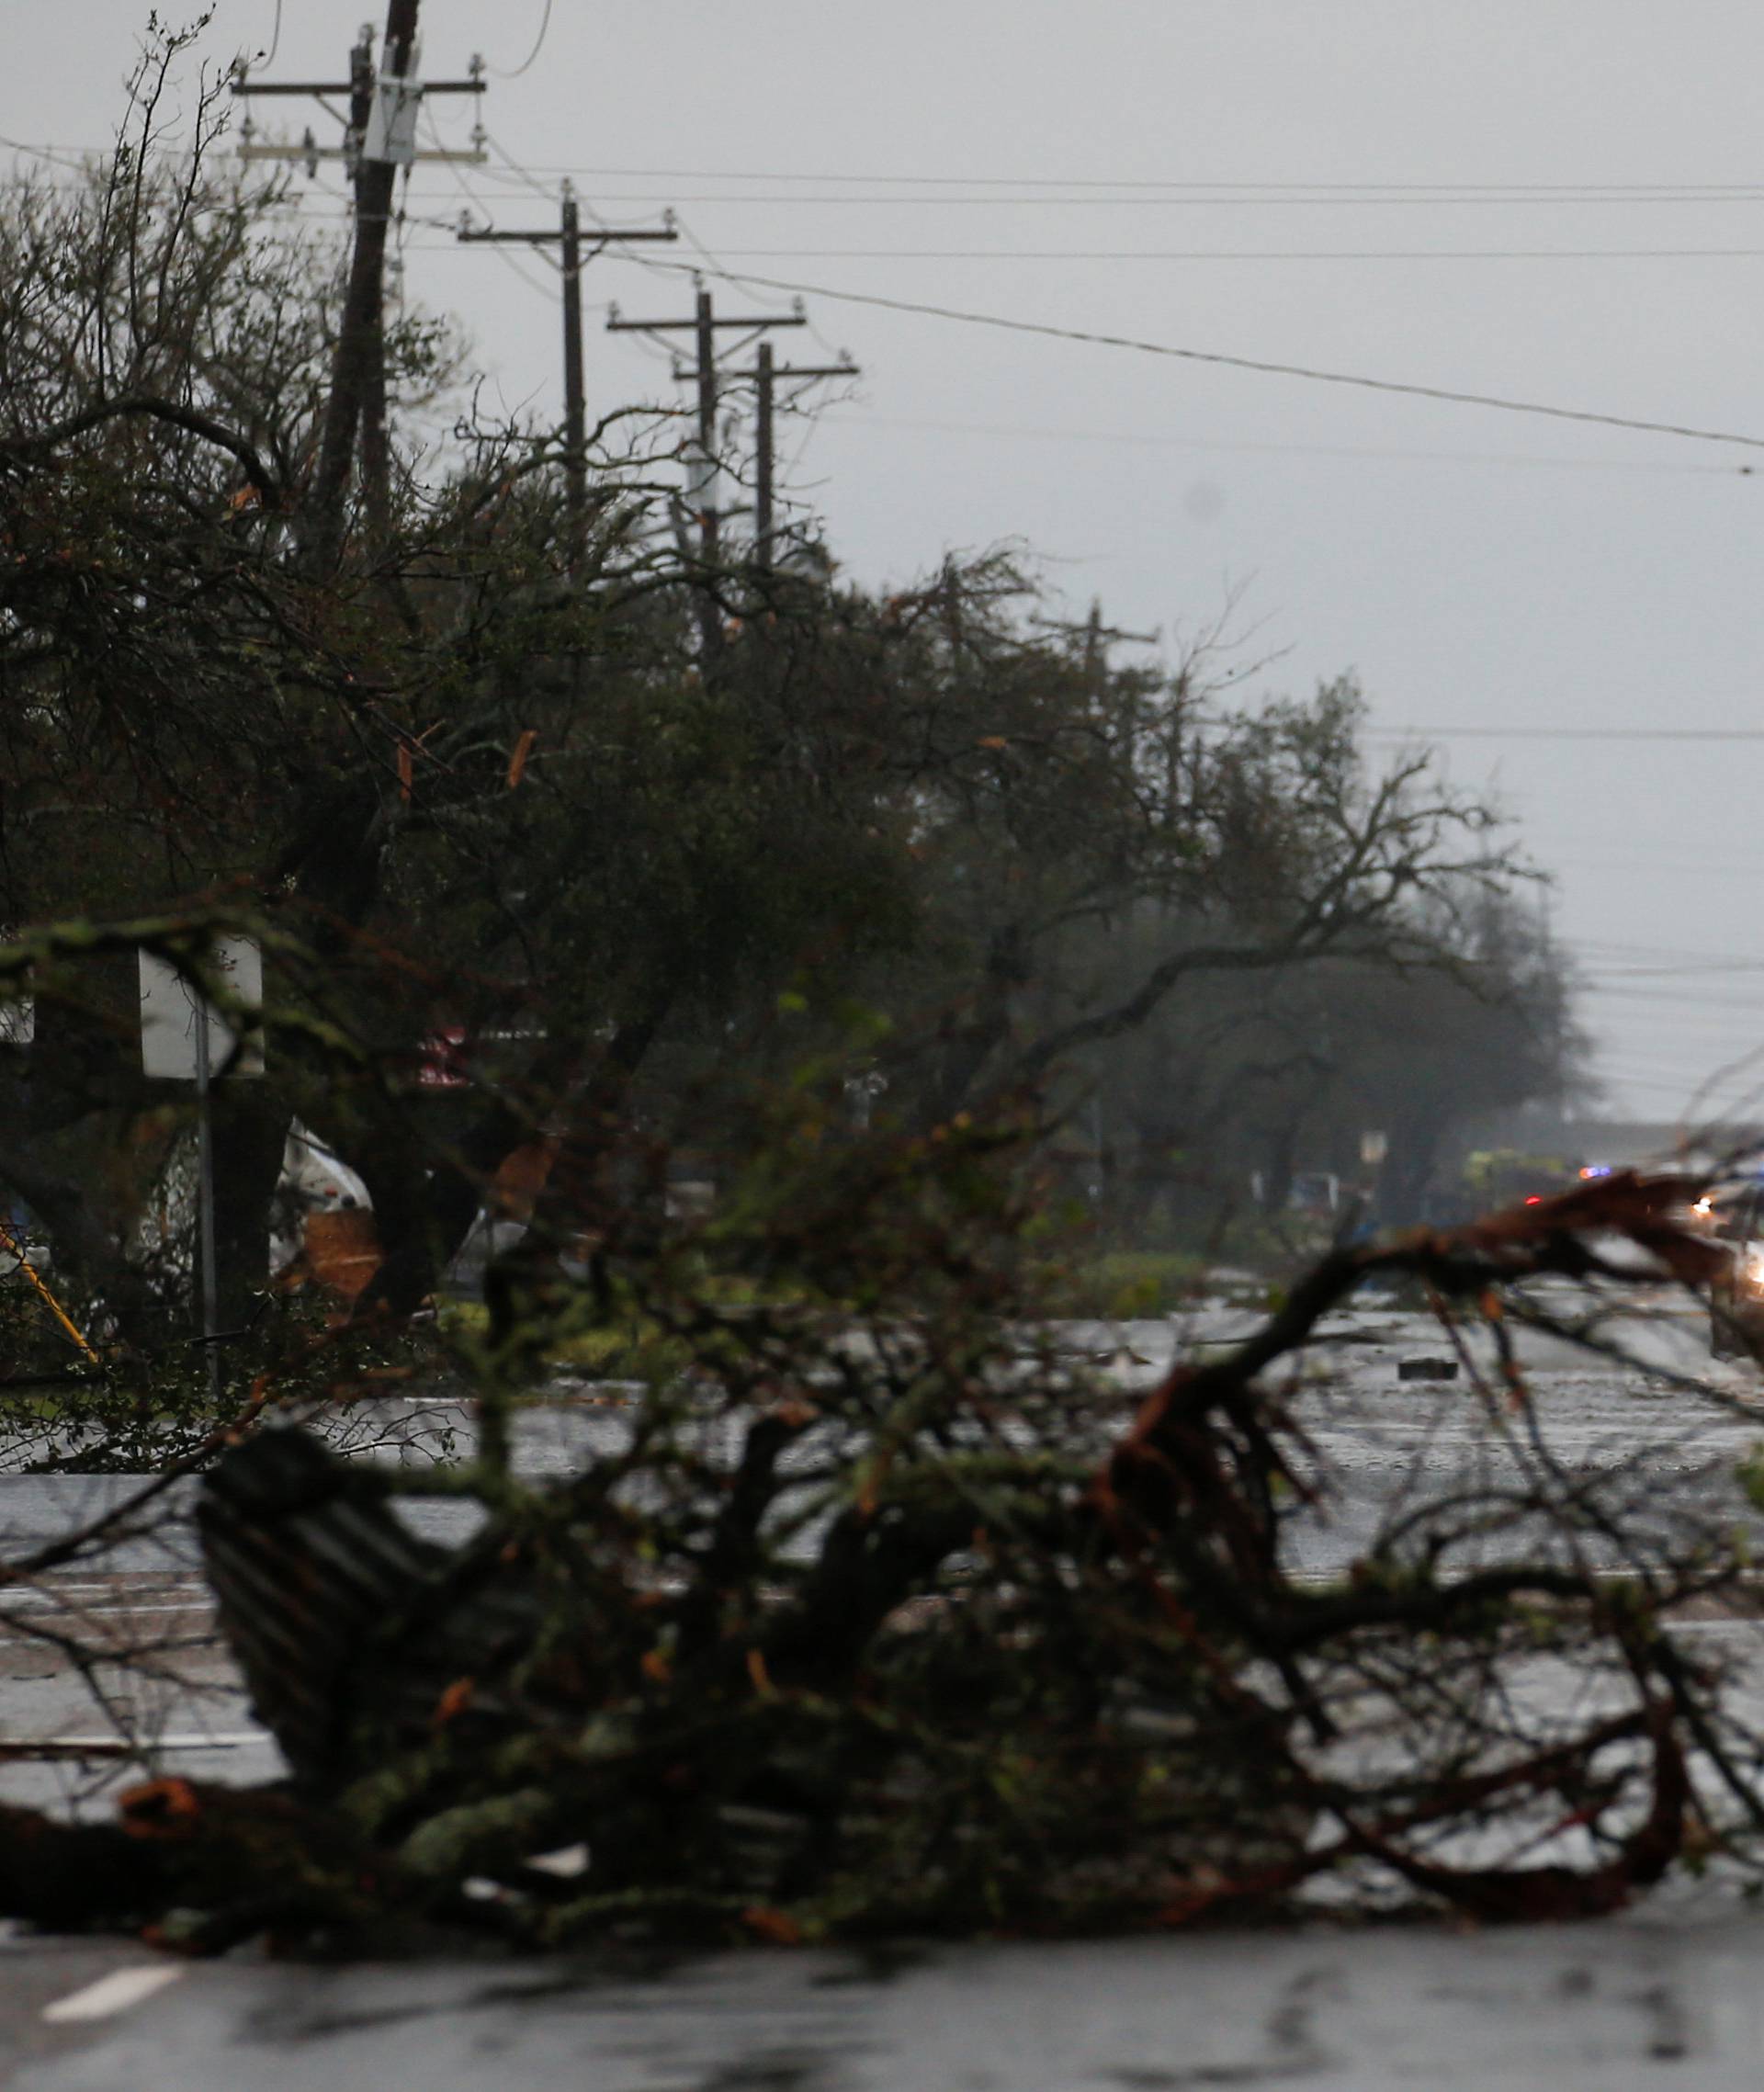 A fallen tree lies along a road as an emergency response team arrives to assess damage from Hurricane Harvey in Rockport